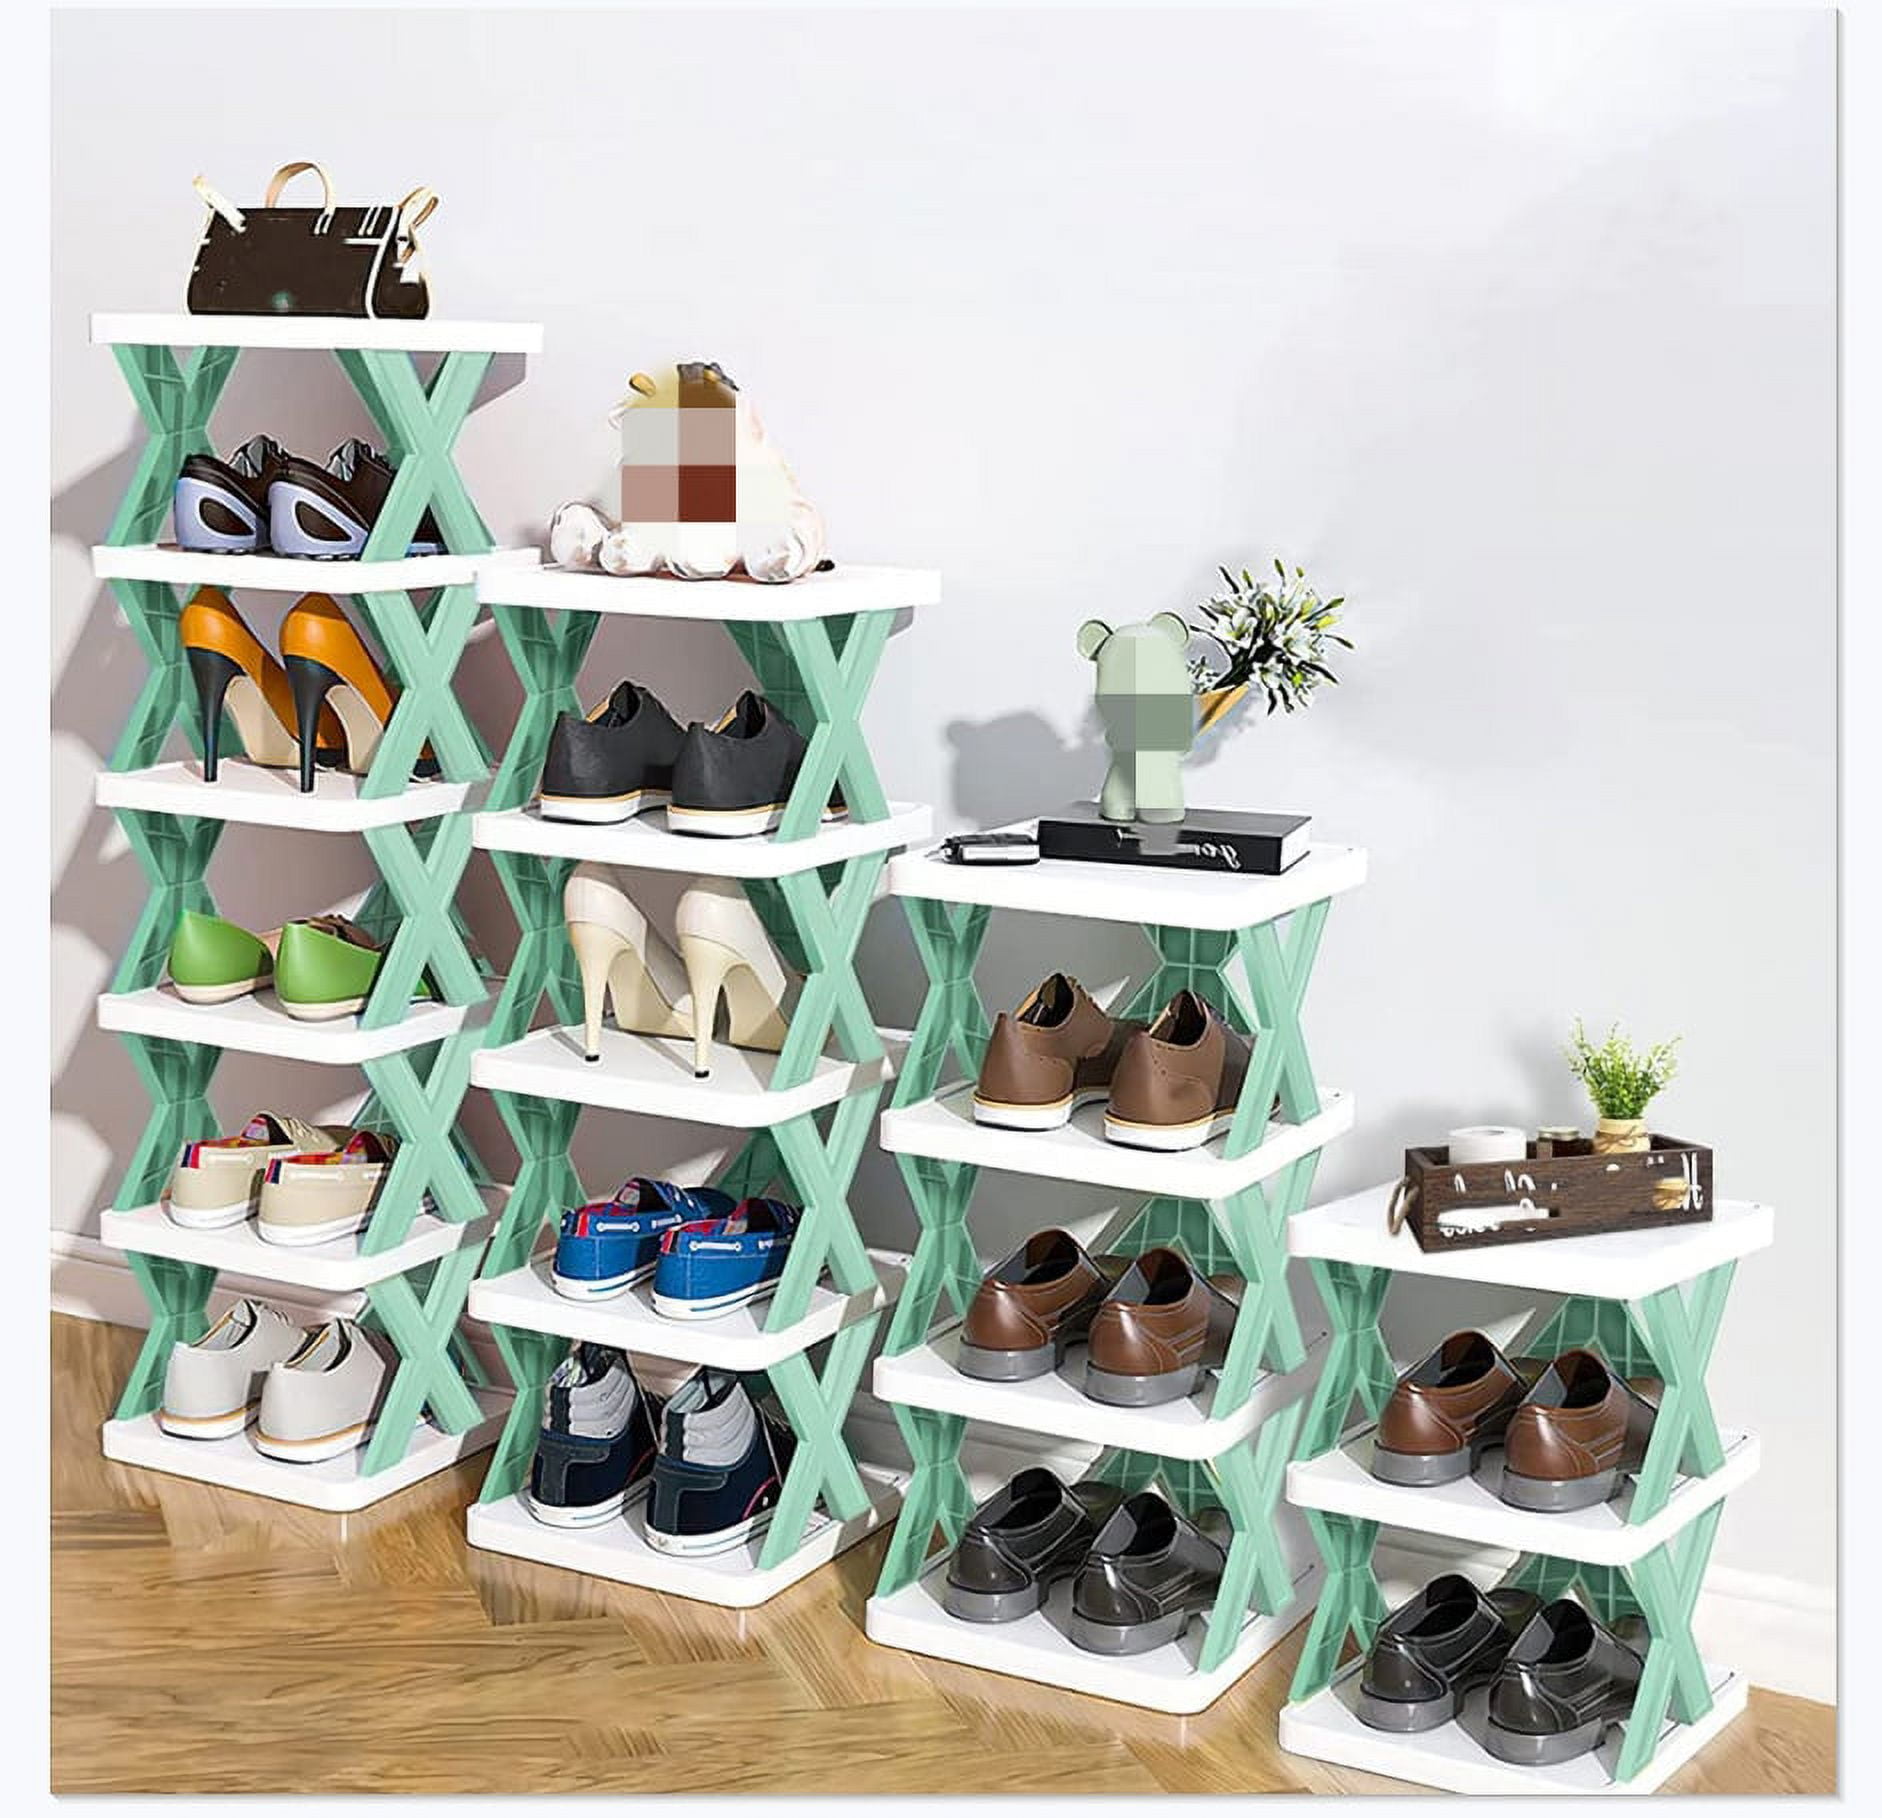 Large Shoe Rack Organizer - Tiered Storage Shoe Stand Tower for Sneakers, Heels, Flats, and Accessories by Lee Furniture - 4 Rows - 8 Tiers - Black